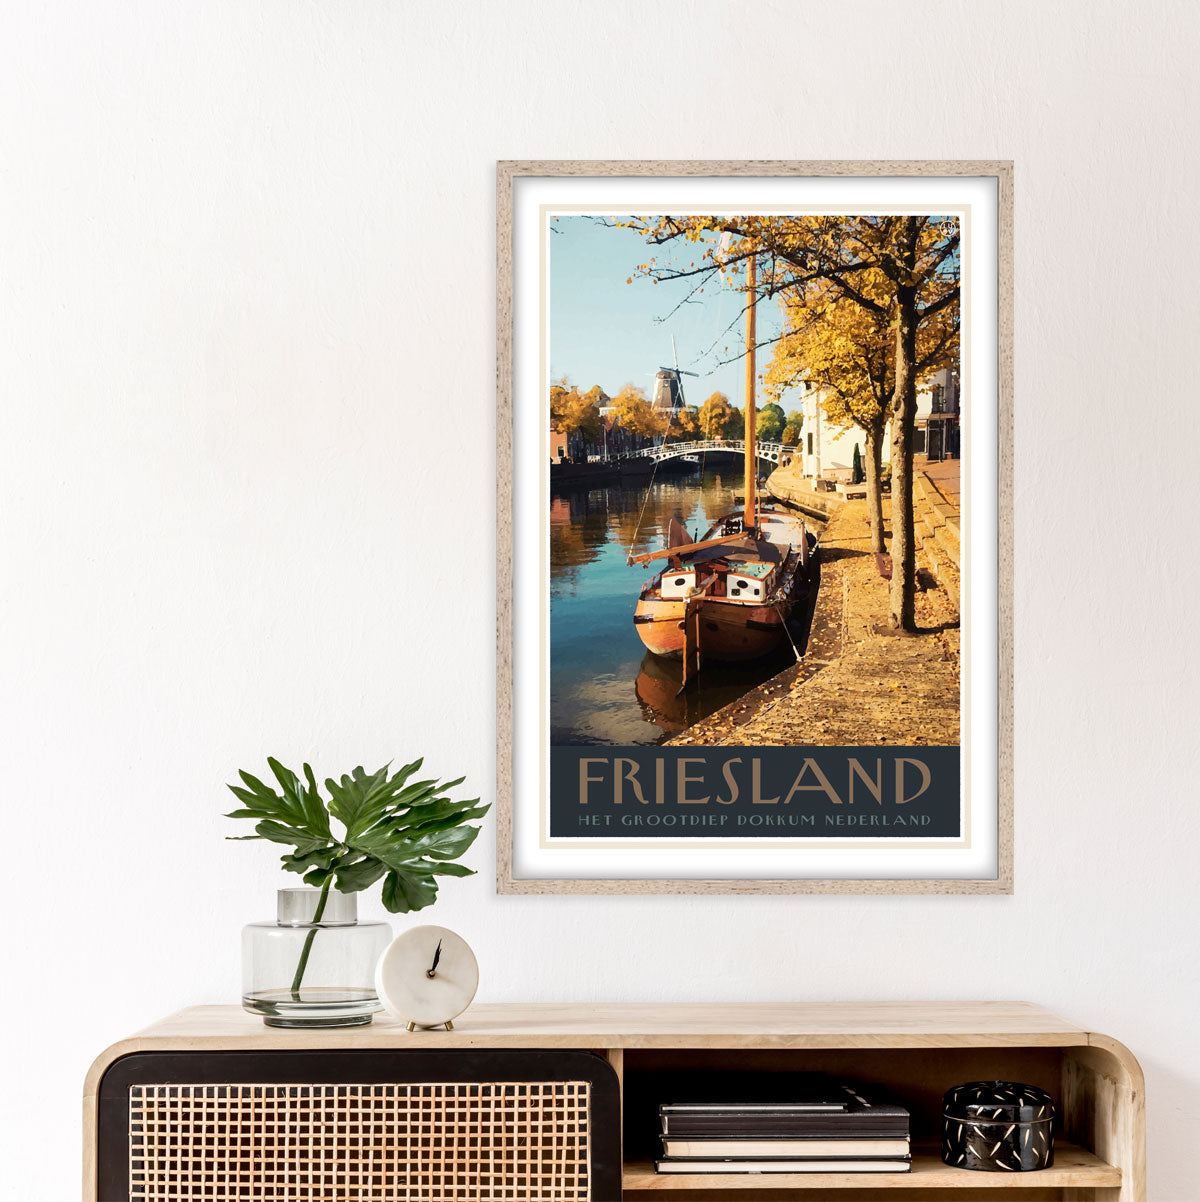 Friesland vintage travel style framed poster by places we luv